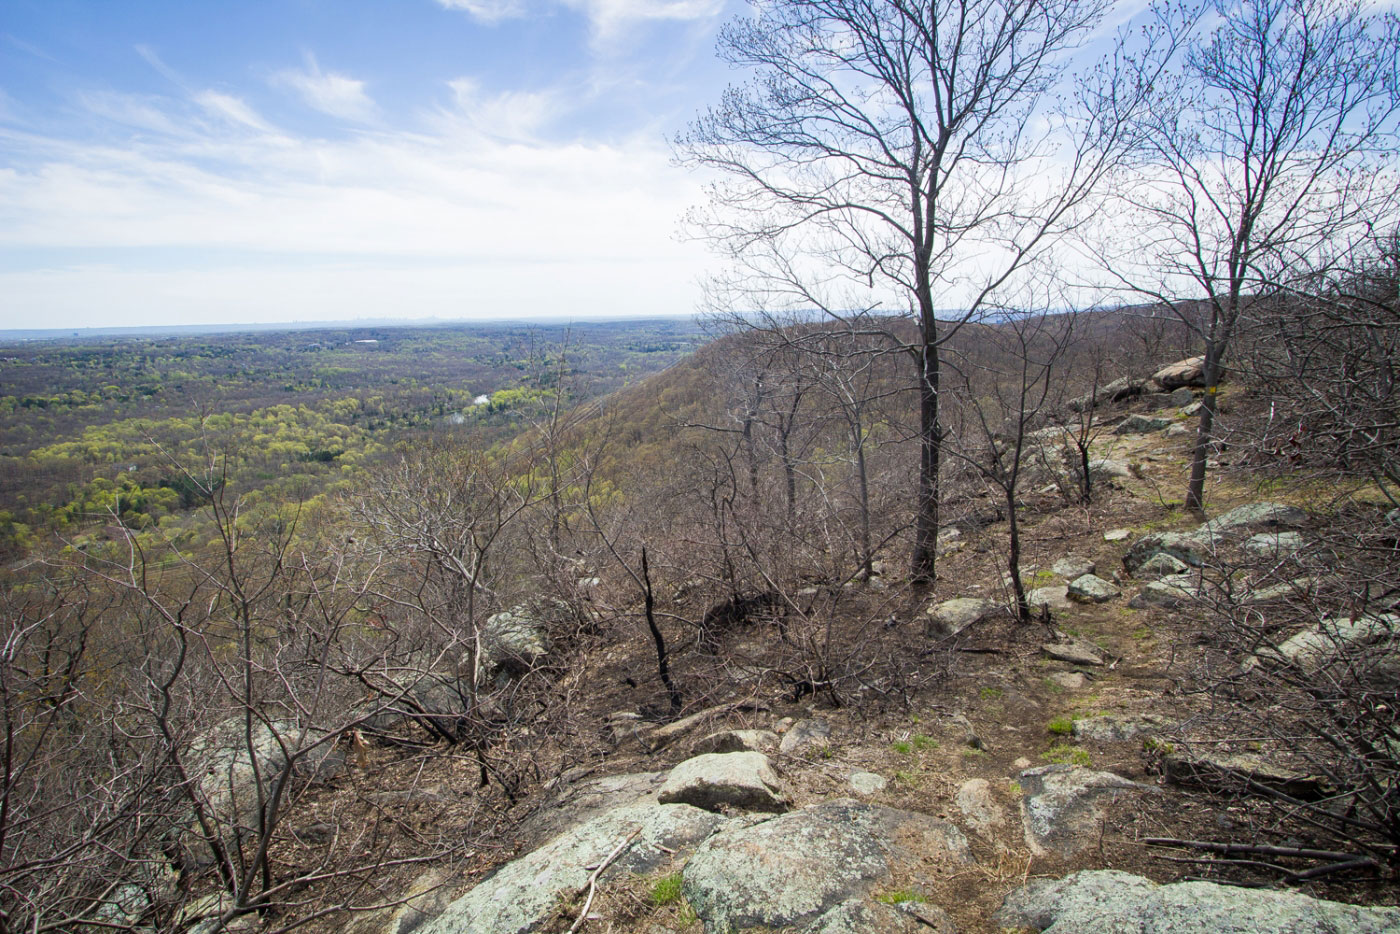 Hike Panther Mountain and Pine Meadow Loop in Harriman State Park, New York - Stav is Lost